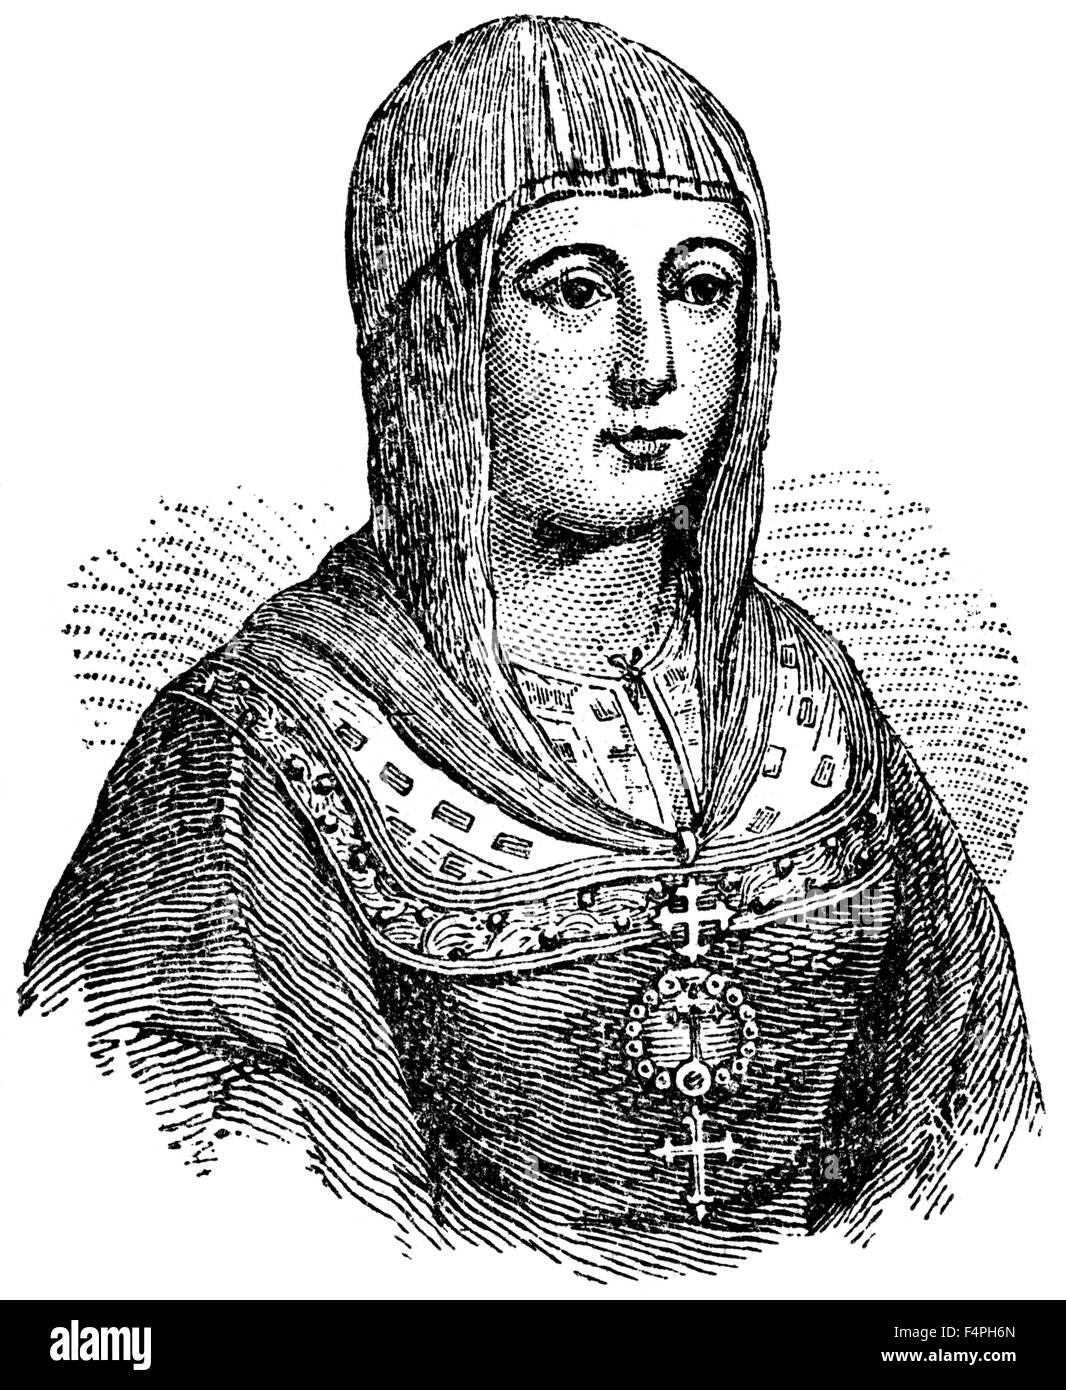 Isabella I of Castile (1451-1504), Queen of Castile and Leon, 1474-1504, Wife of Ferdinand II of Aragon, Engraving, 1889 Stock Photo